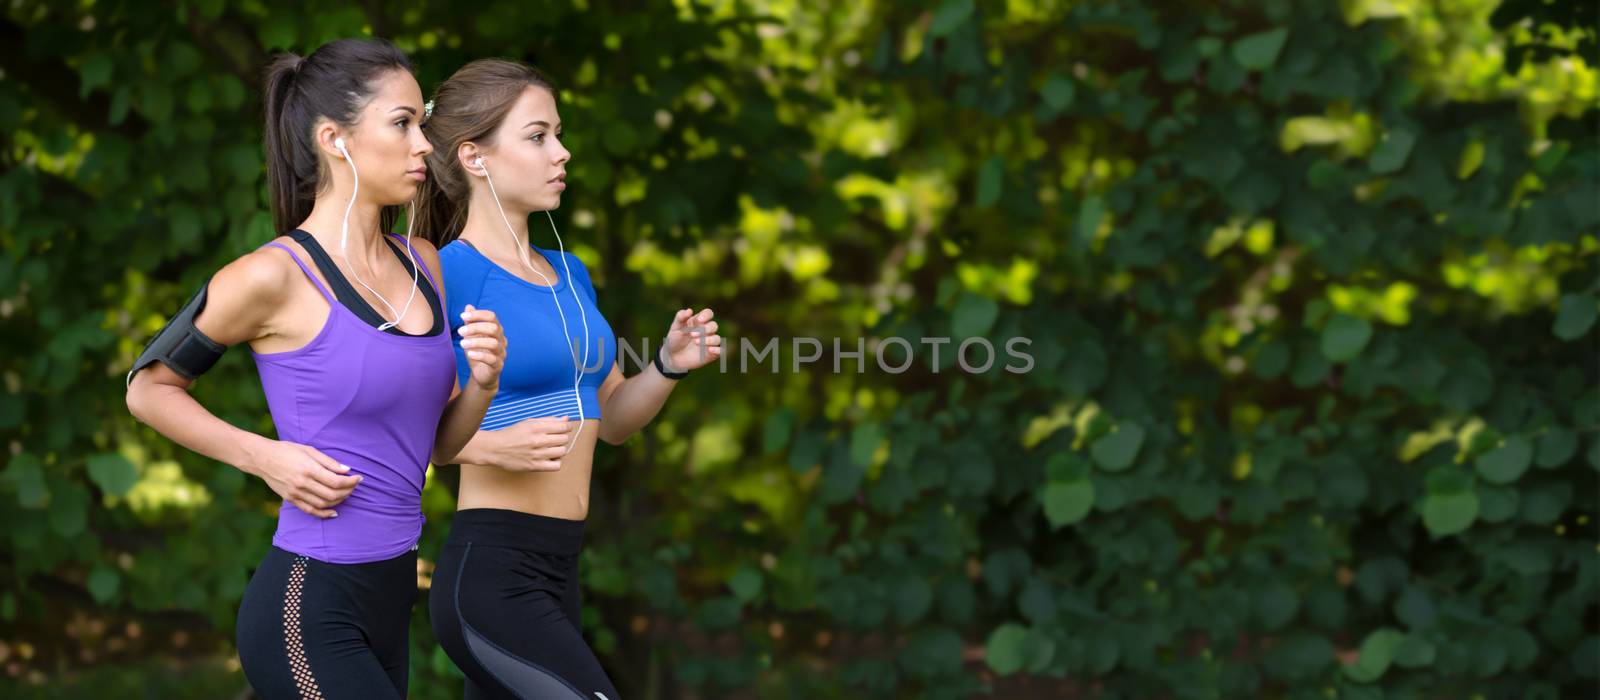 Healthy lifestyle banner - two beautiful fitness girls are jogging in the park on a greenery background (copy space)